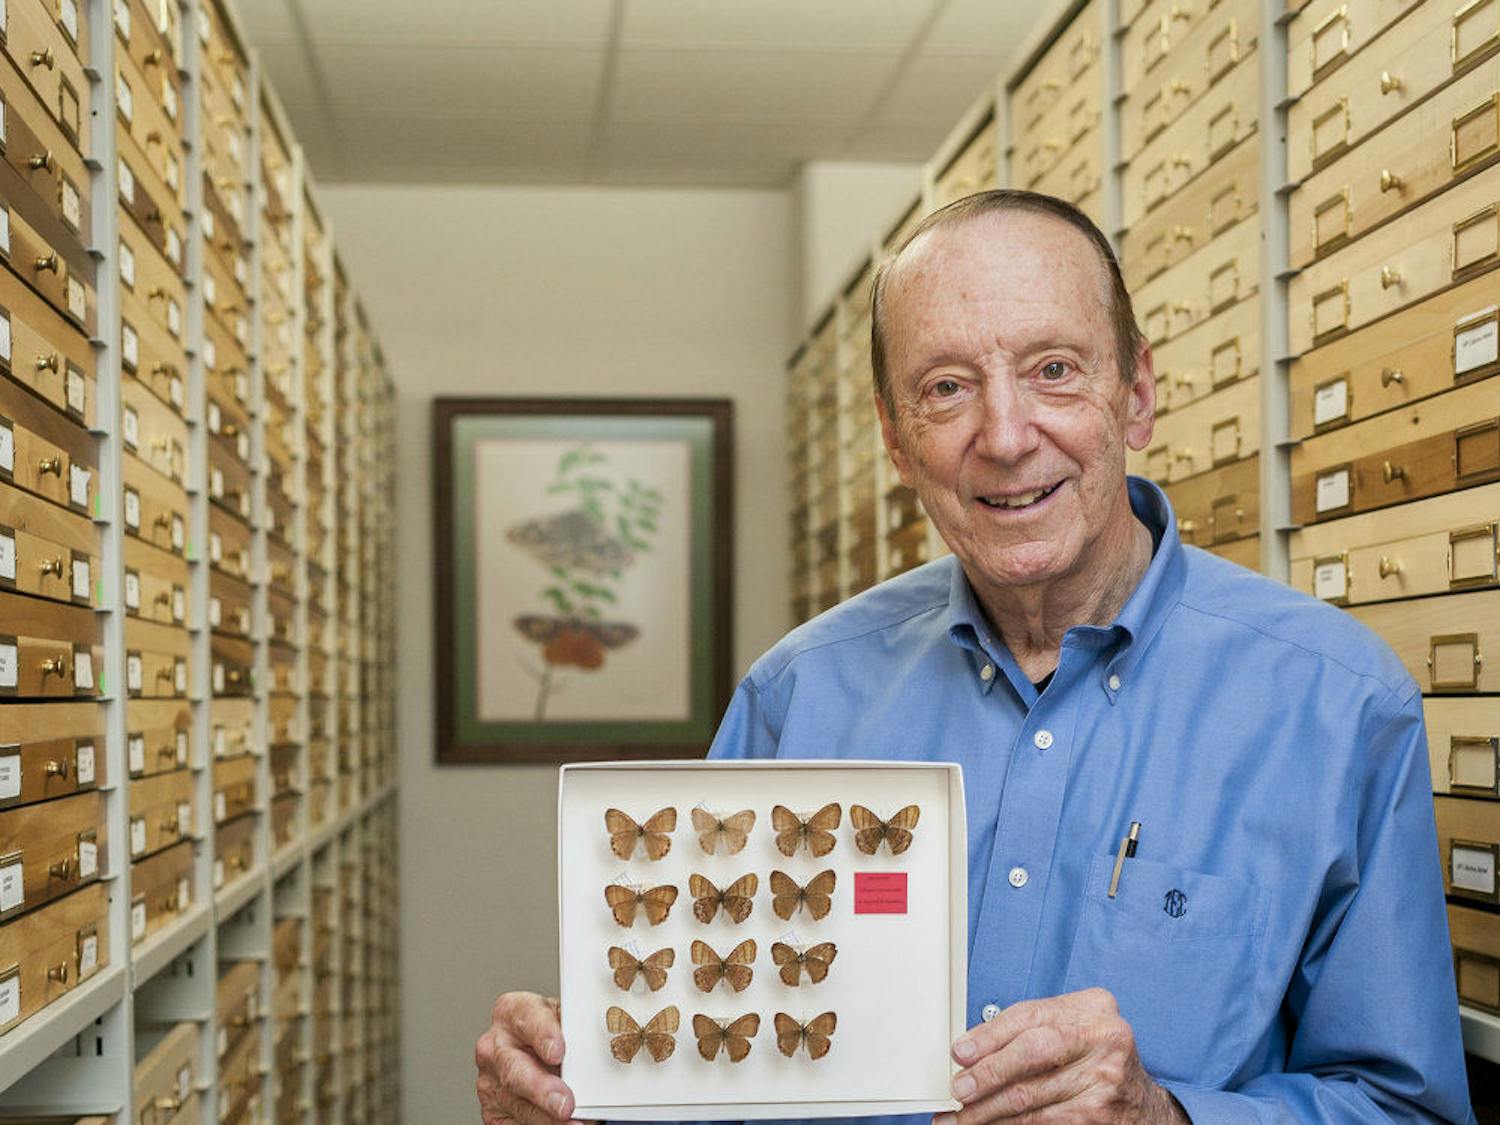 Thomas Emmel, 76, holds onto 13 specimens of the brown butterfly in his collection. After they were recovered about 60 years after his initial discovery, Emmel said he was surprised they were rediscovered. He said he hopes to discover more about the species.
&nbsp;